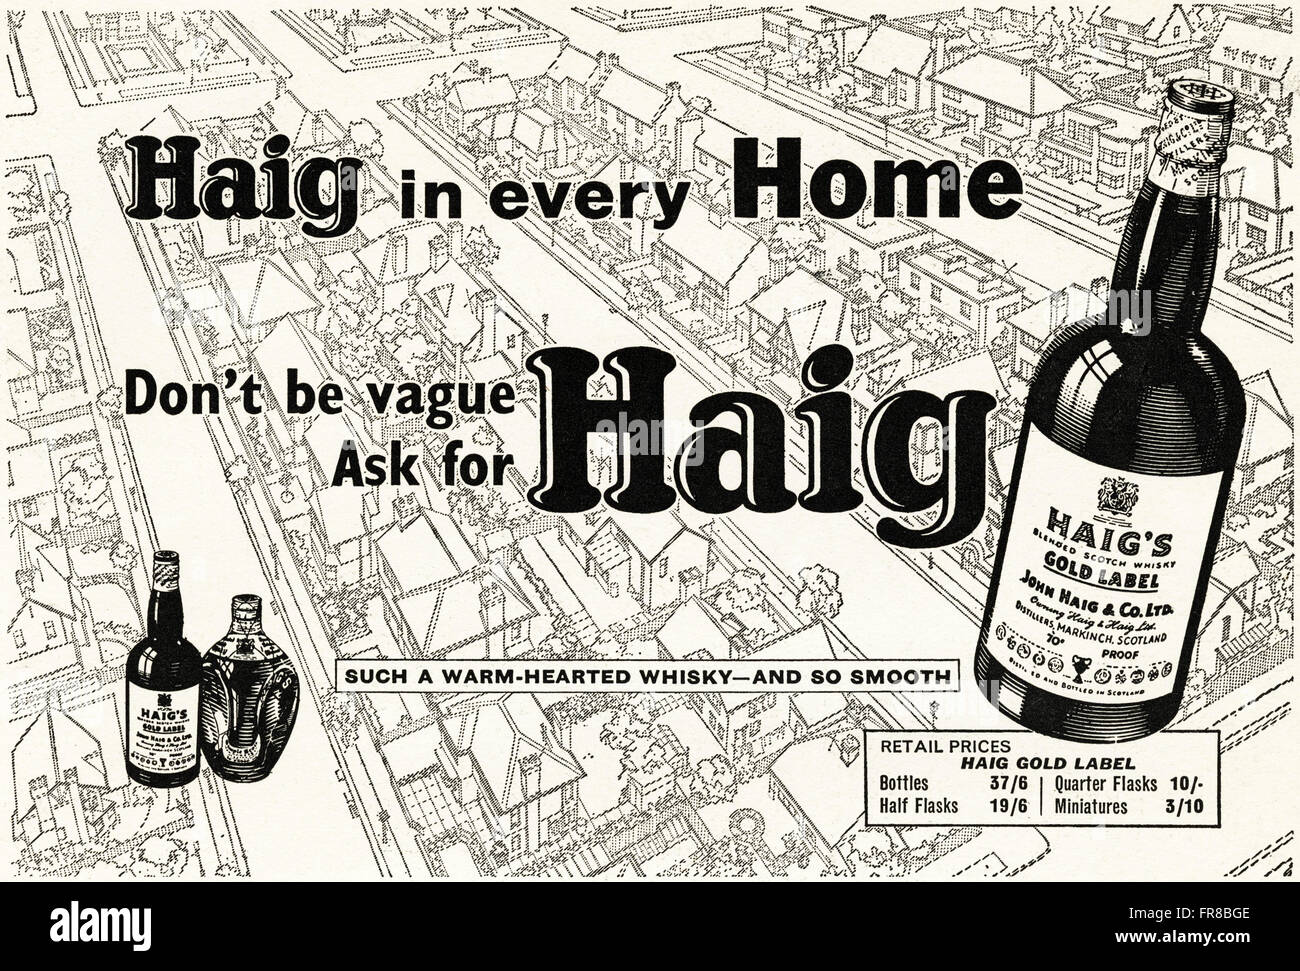 Original vintage advert from 1950s. Advertisement dated 1959 advertising HAIG Gold Label Scotch whisky. Stock Photo